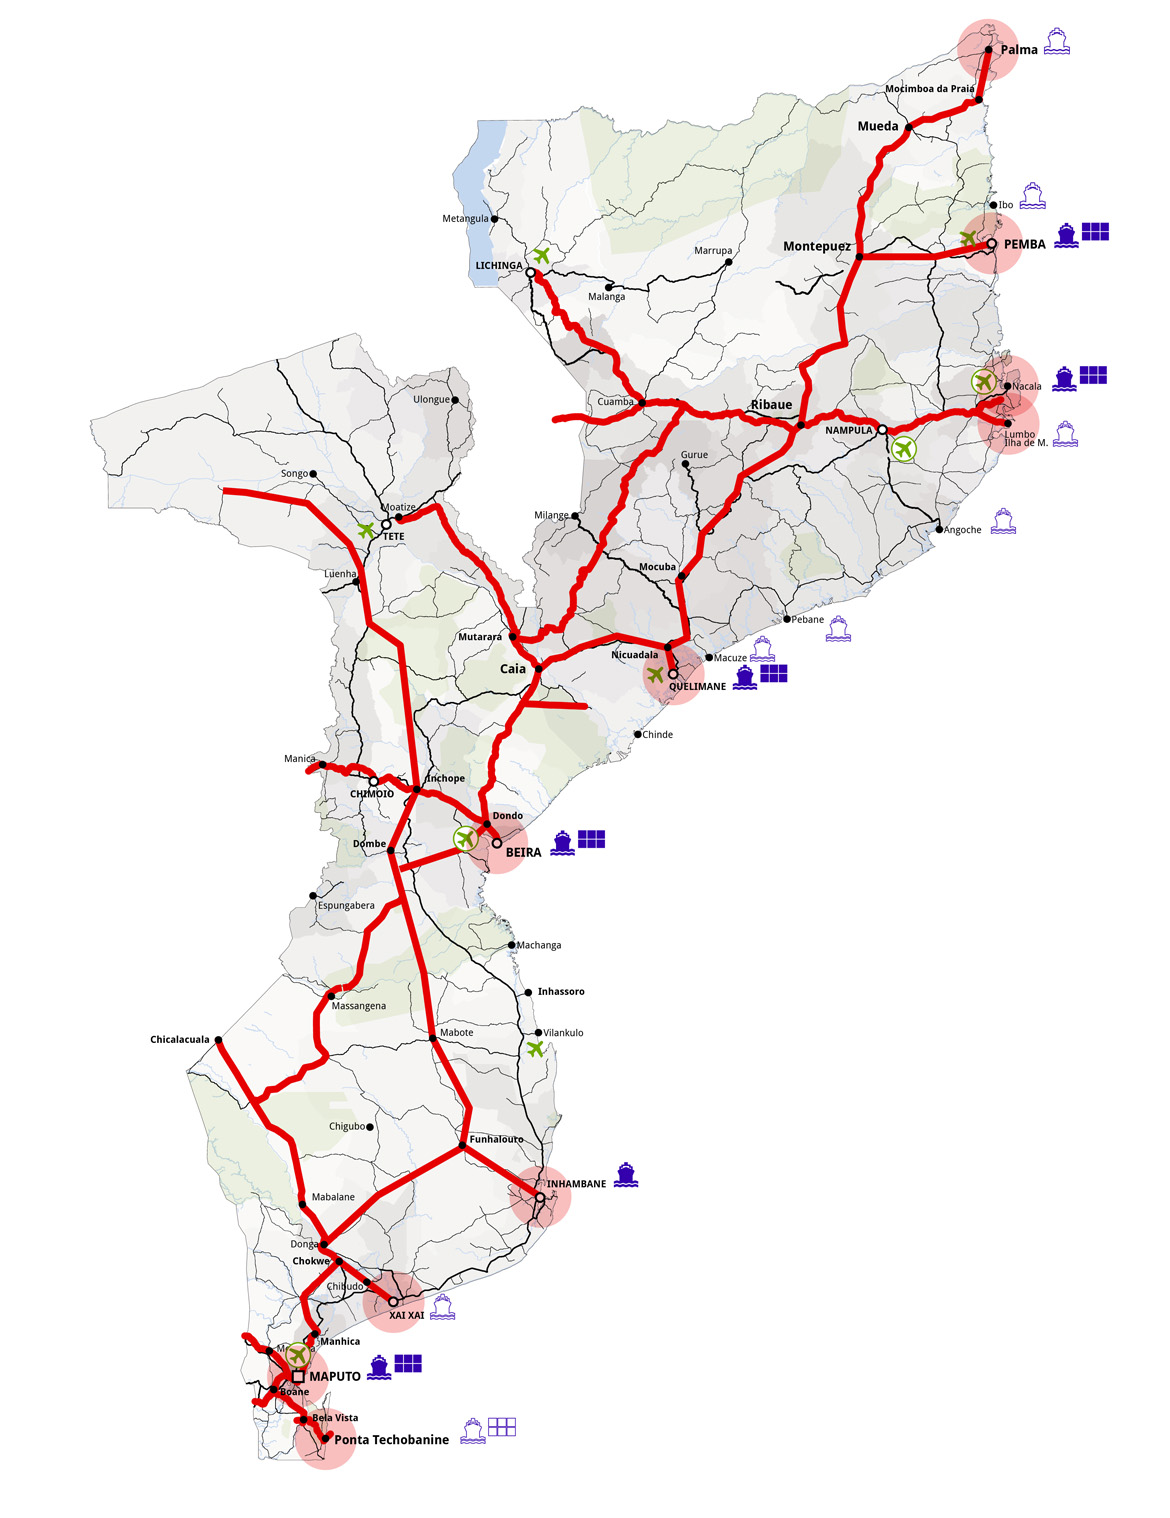 Systematica-Mozambique North-South Railway-4-Proposed railway network_A